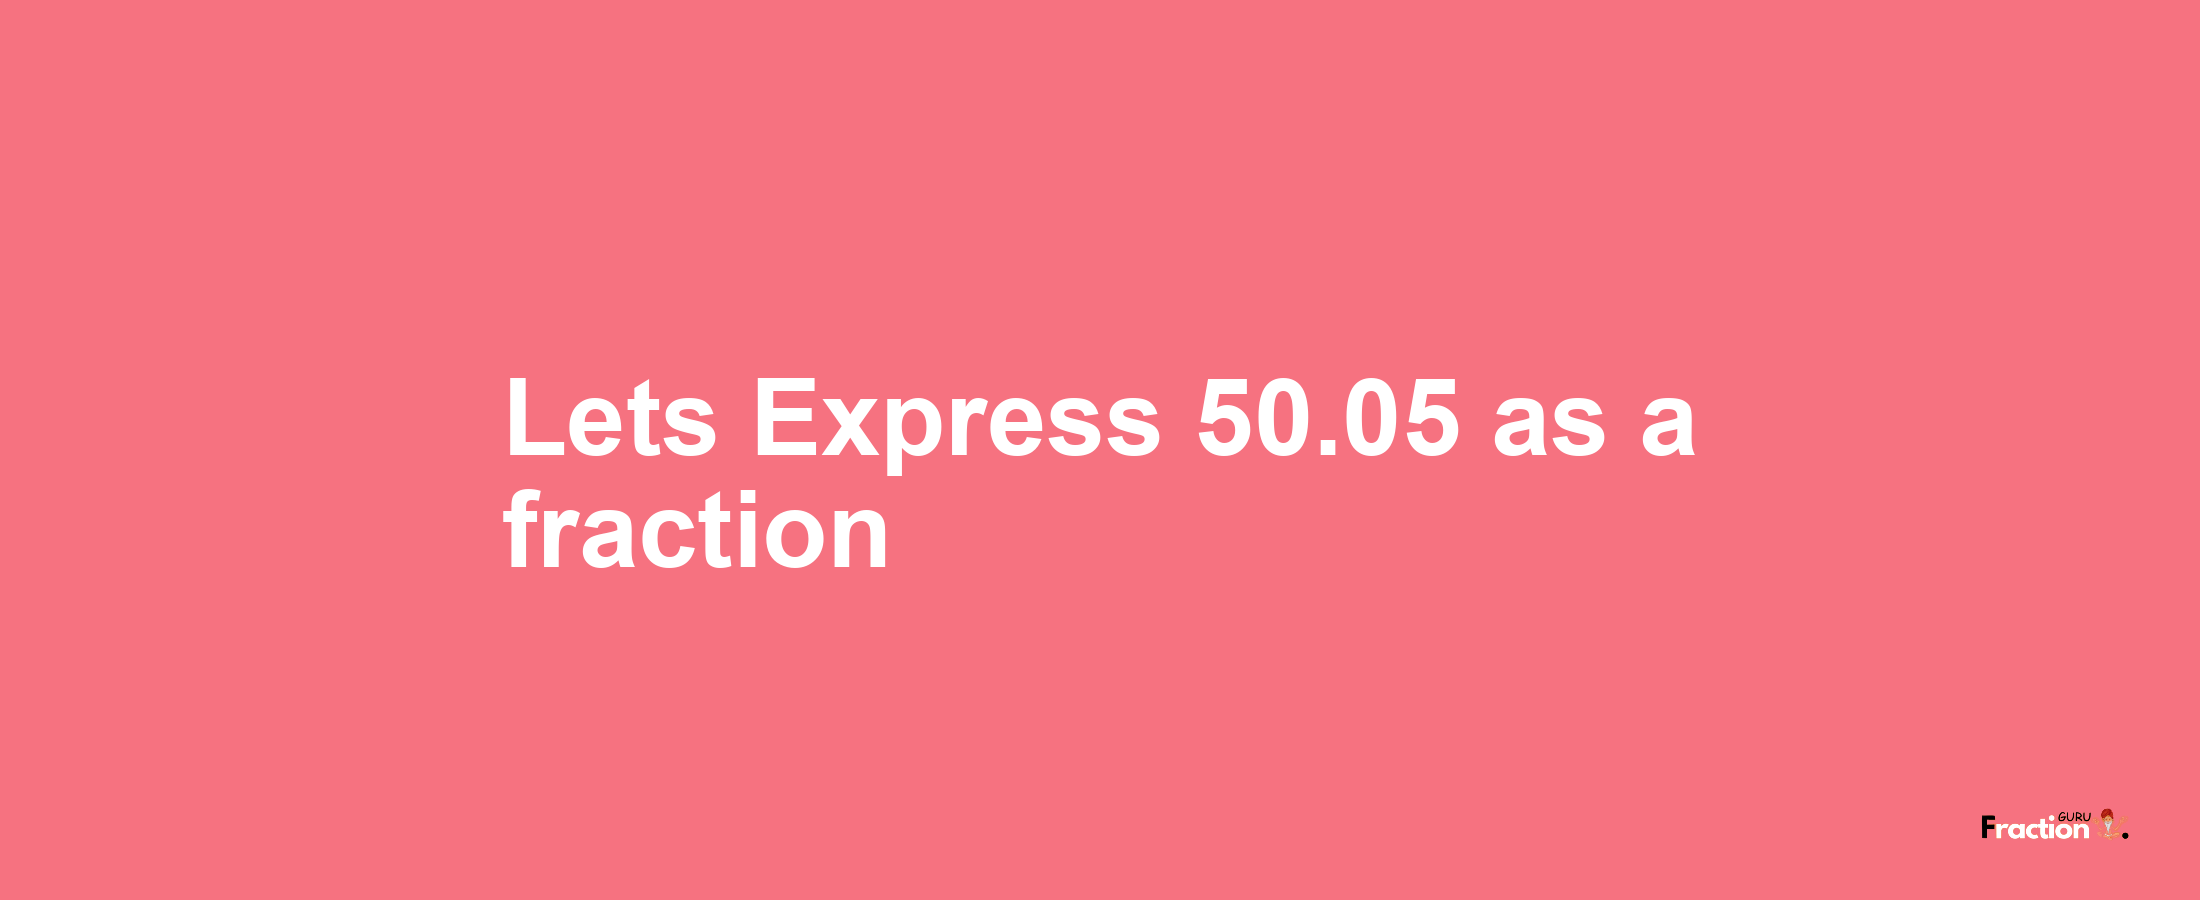 Lets Express 50.05 as afraction